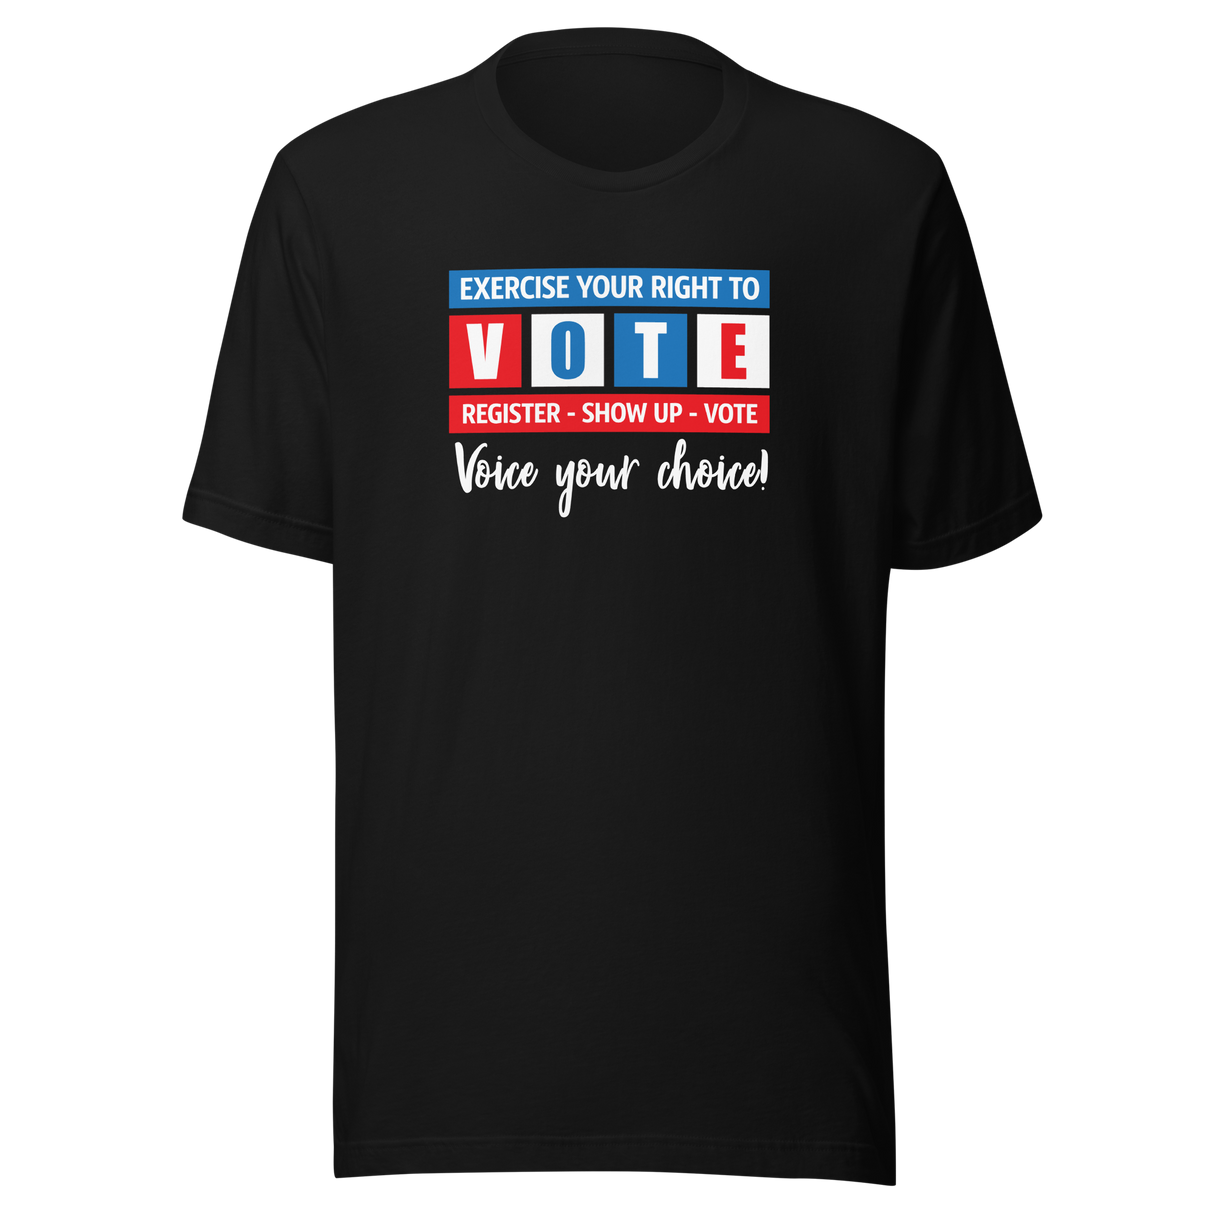 exercise-your-right-to-vote-voice-your-choice-vote-tee-exercise-t-shirt-gerrymandering-tee-voting-t-shirt-election-tee#color_black